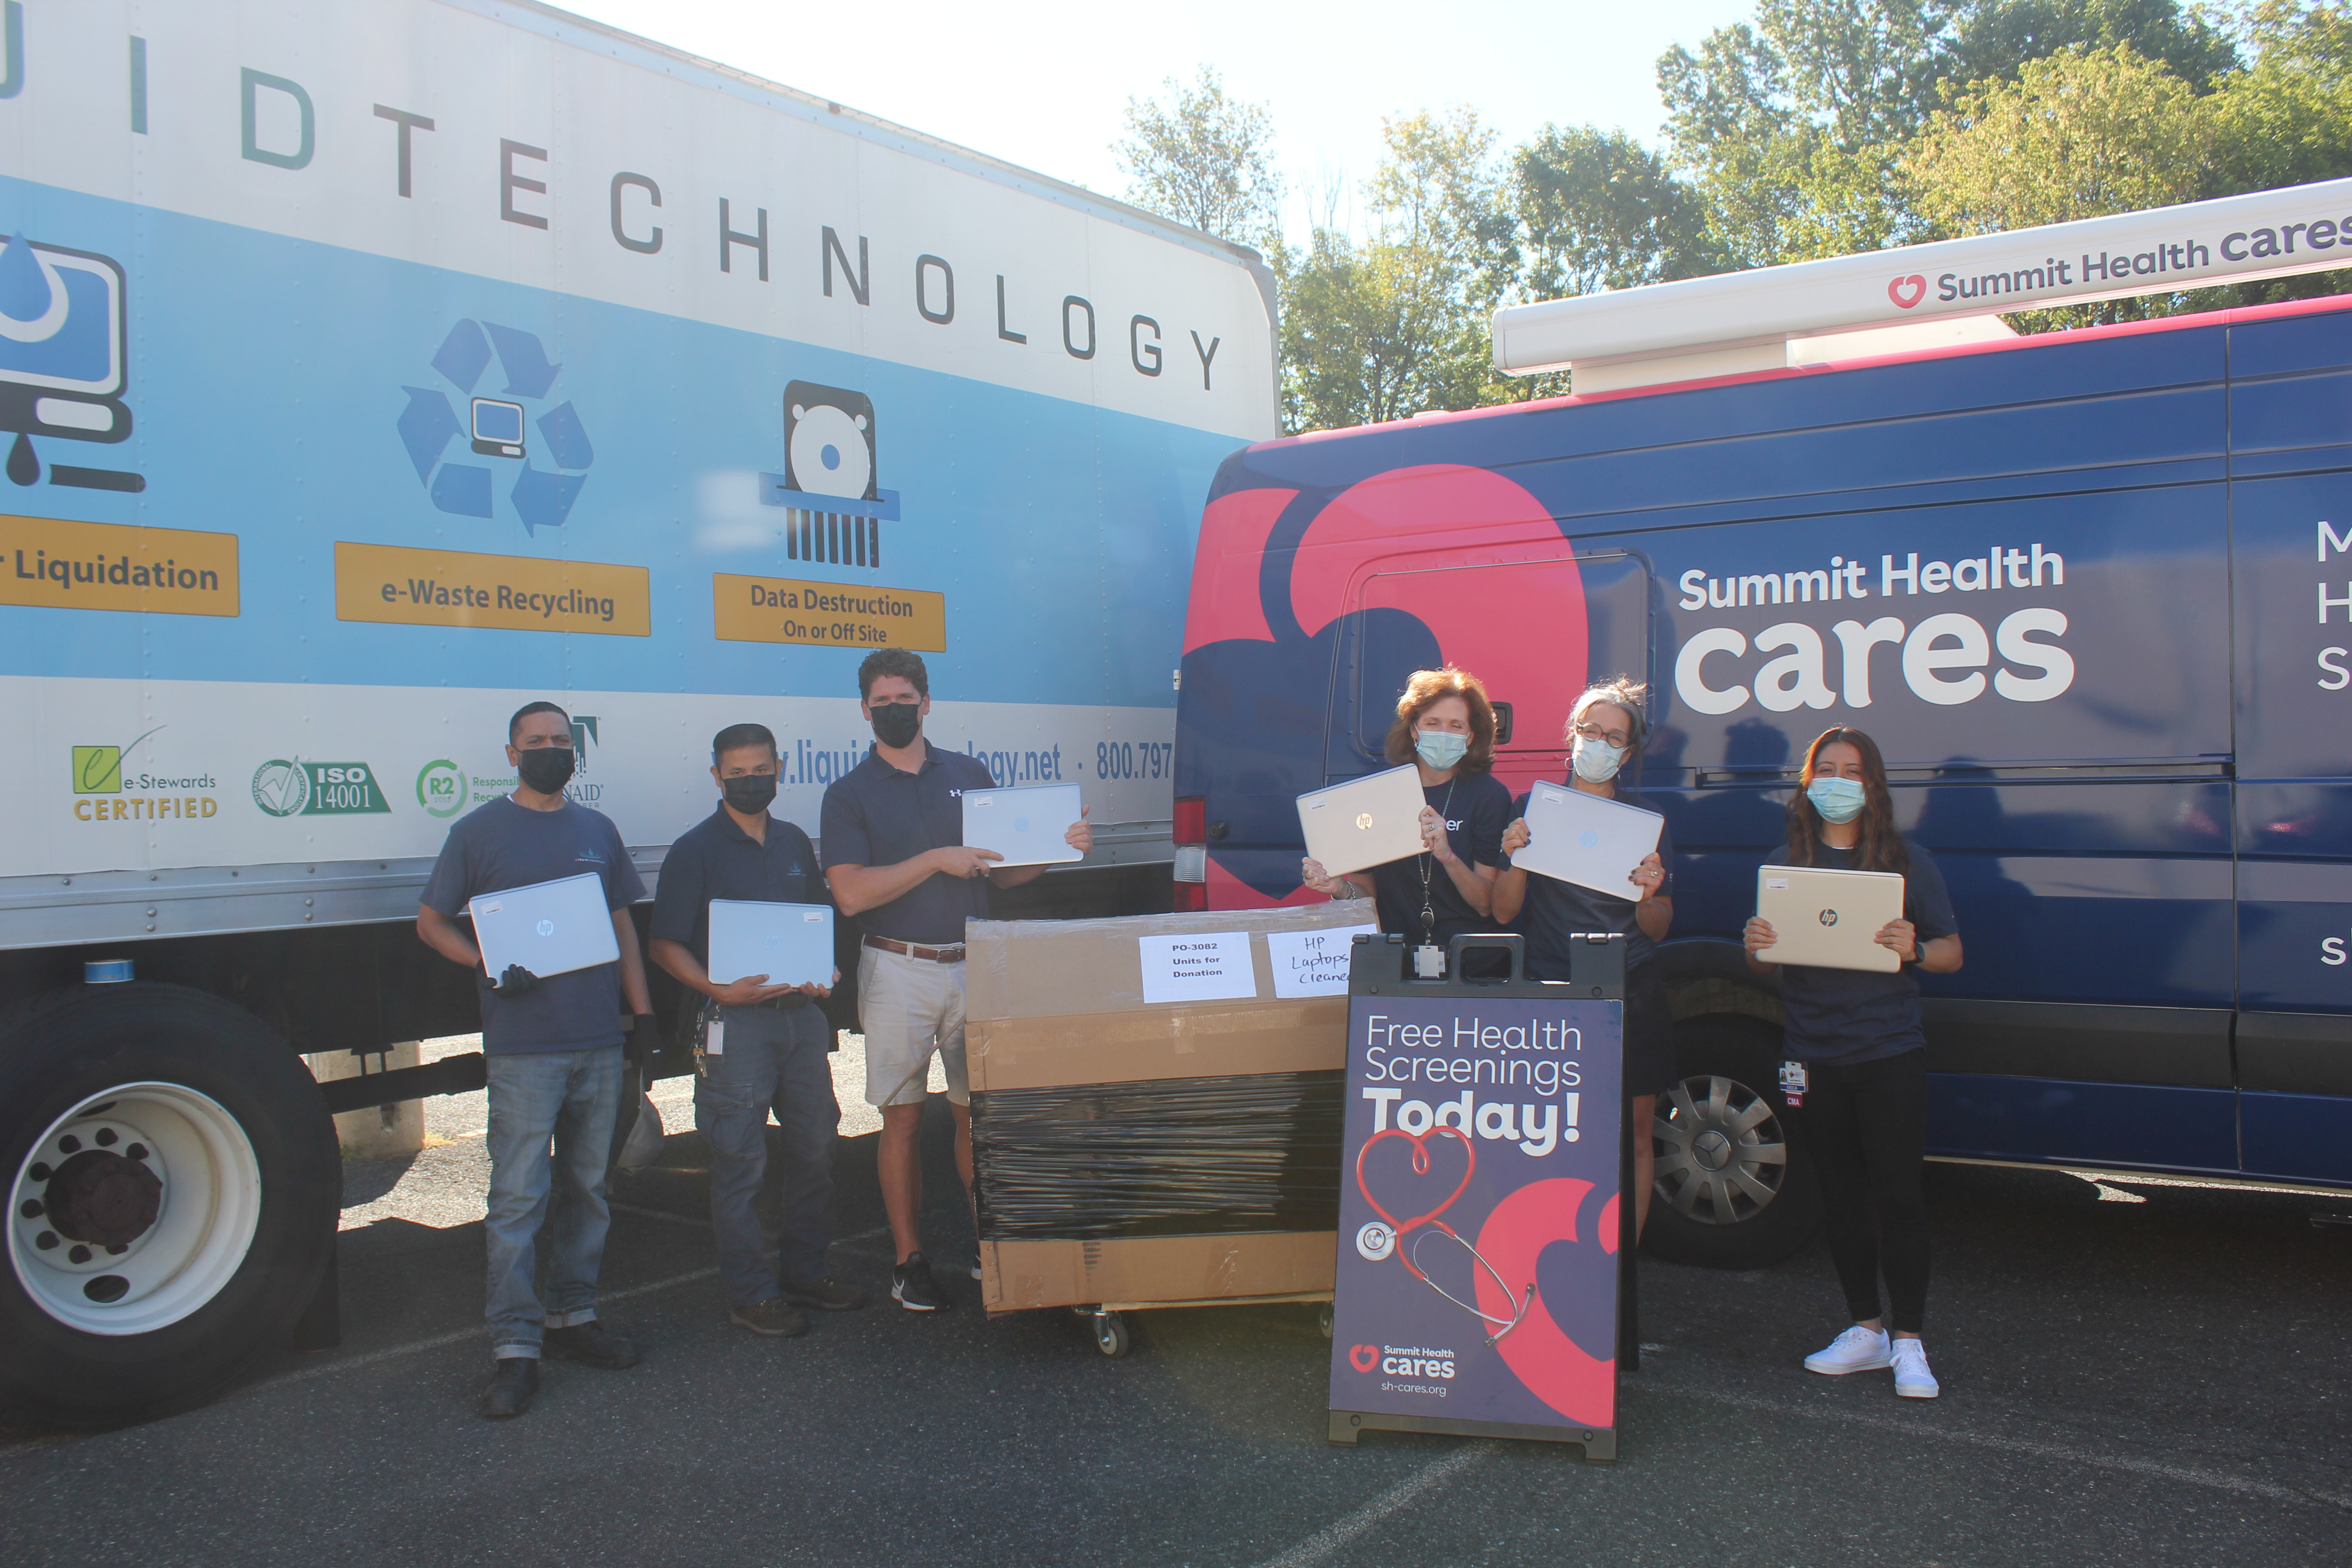 Laptops donated by Summit Health being dropped off by Liquid Technology after secure degaussing. They will be included with school supplies in Summit Health Cares' backpacks donated to New Jersey children in need.

(Pictured left to right) From Liquid Technology Bejai Lakhan, Keith Guo, Colin McNamara and from Summit Health Cares Kerry Kelly, Pamela Singer and Erica Montoya.